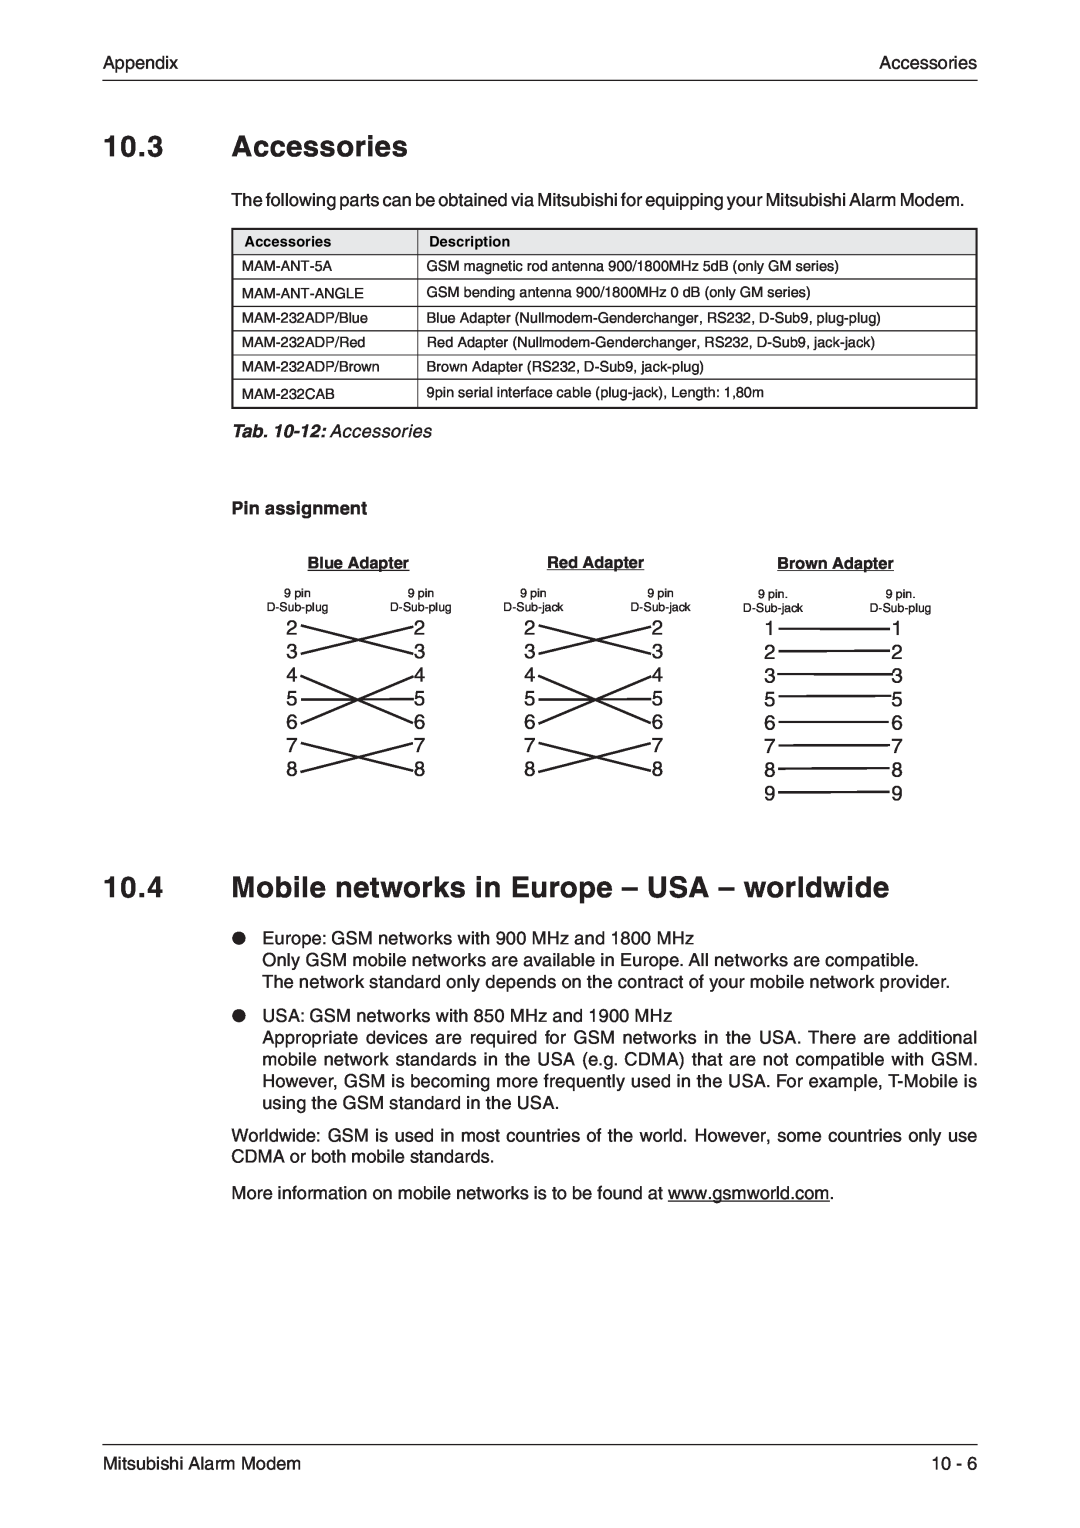 Mitsubishi Electronics MAM-AM24 Mobile networks in Europe - USA - worldwide, Tab. 10-12 Accessories, Pin assignment 